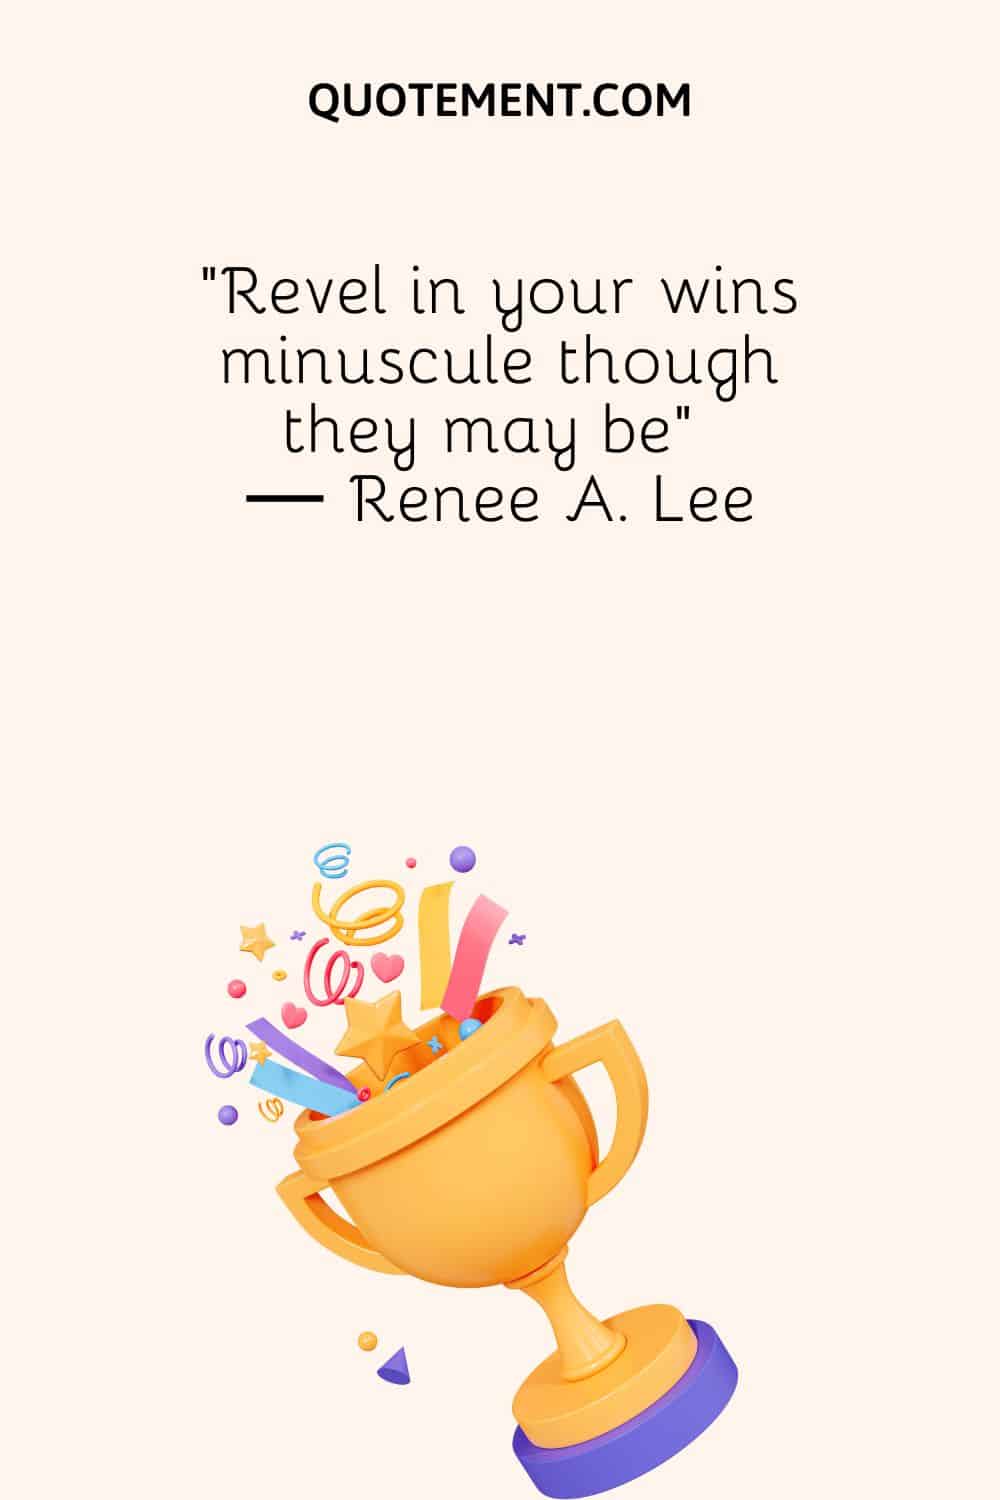 “Revel in your wins minuscule though they may be” ― Renee A. Lee